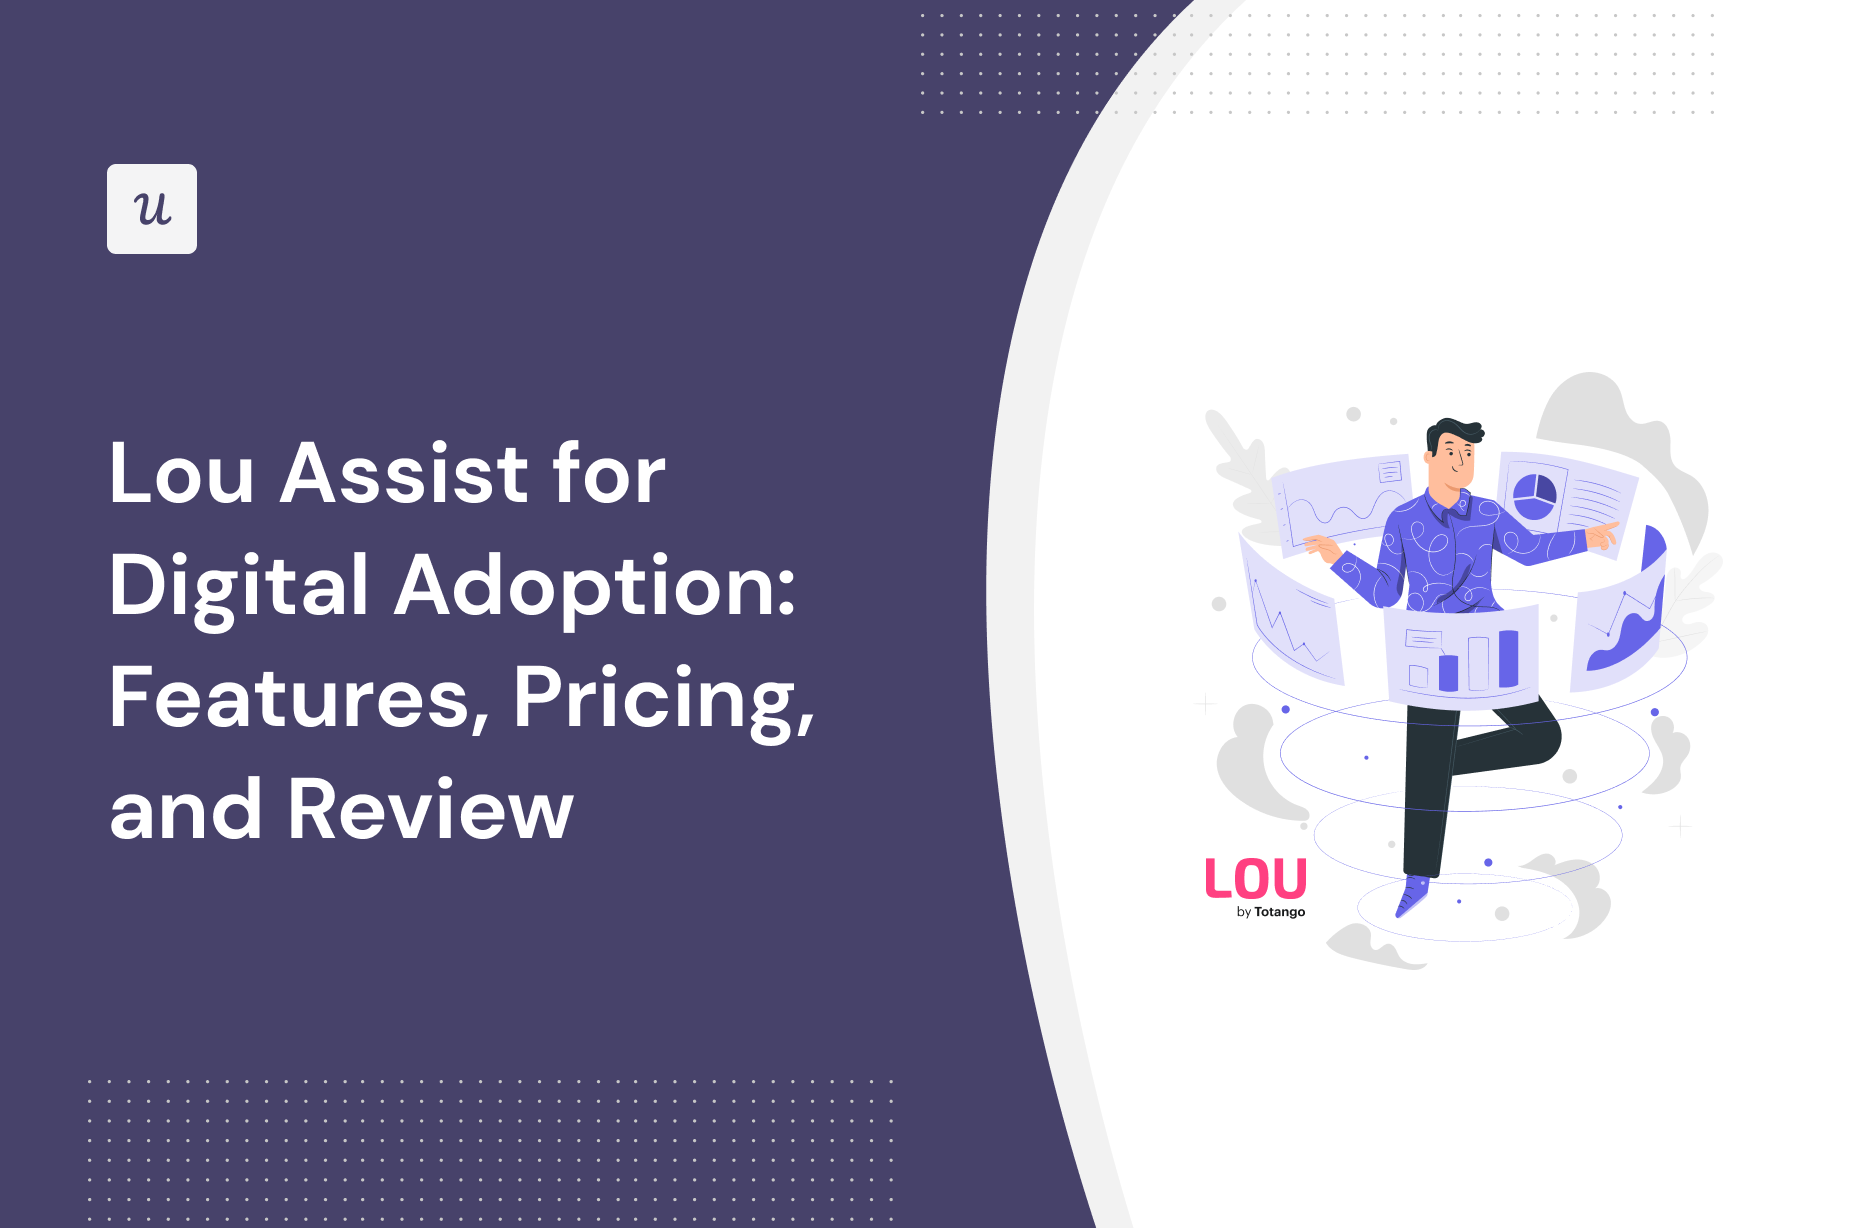 Lou Assist for Digital Adoption: Features, Pricing, and Review